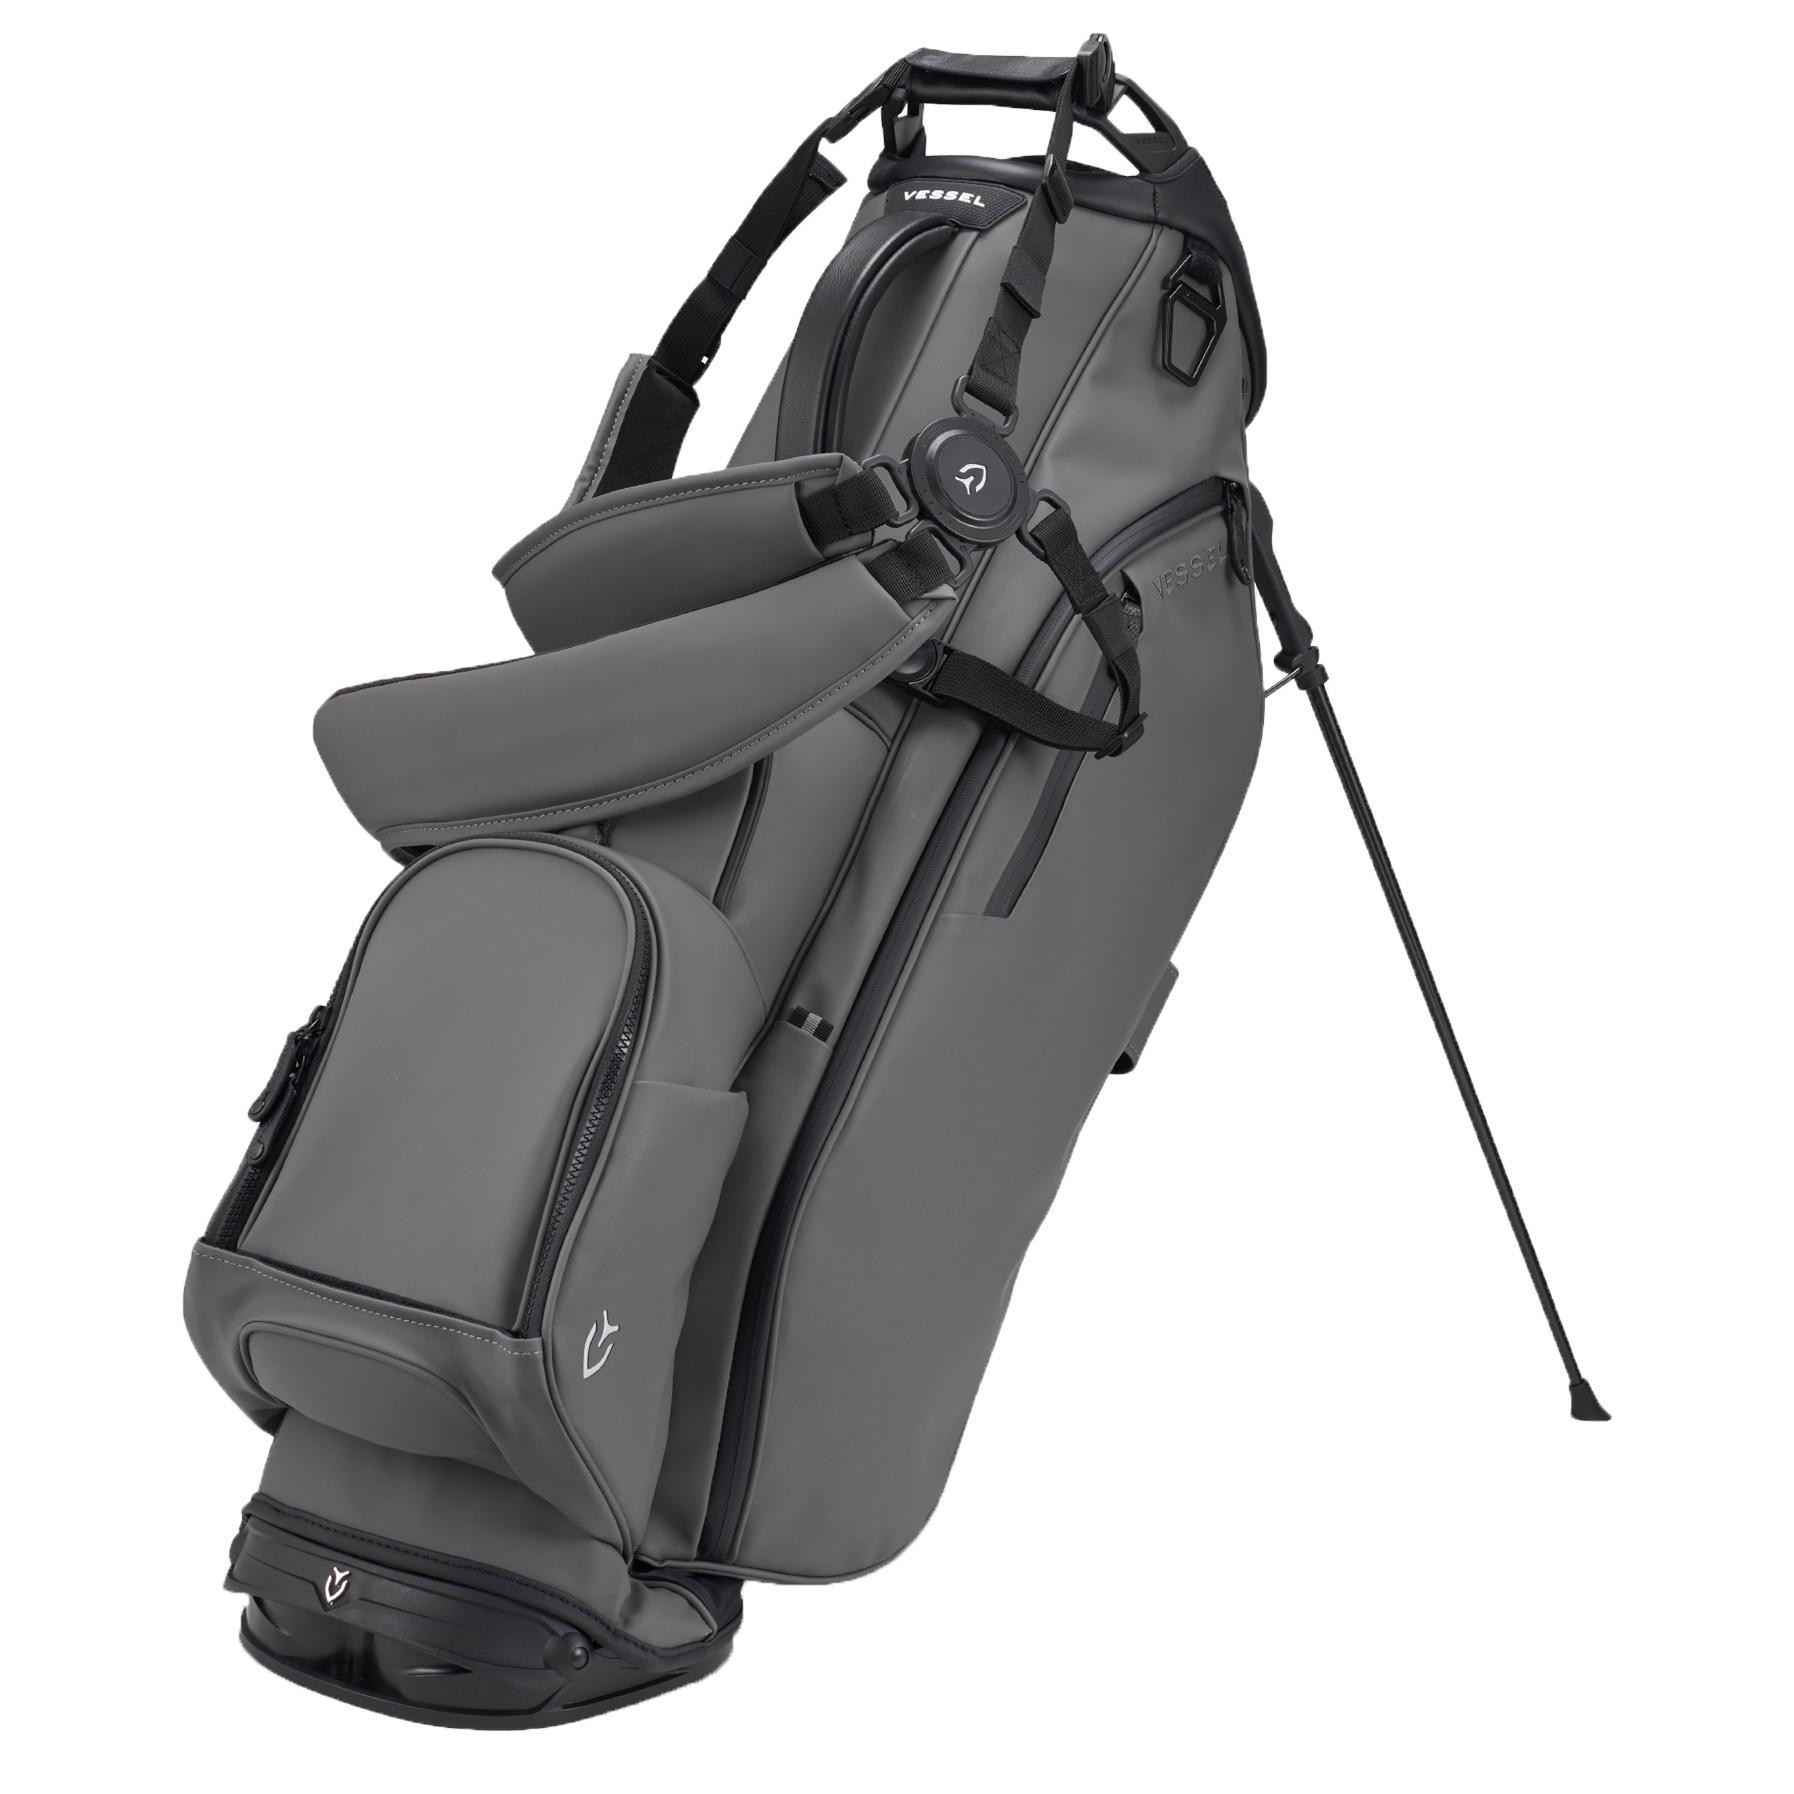 Vessel Golf Player Stand Bag Review, Page 7